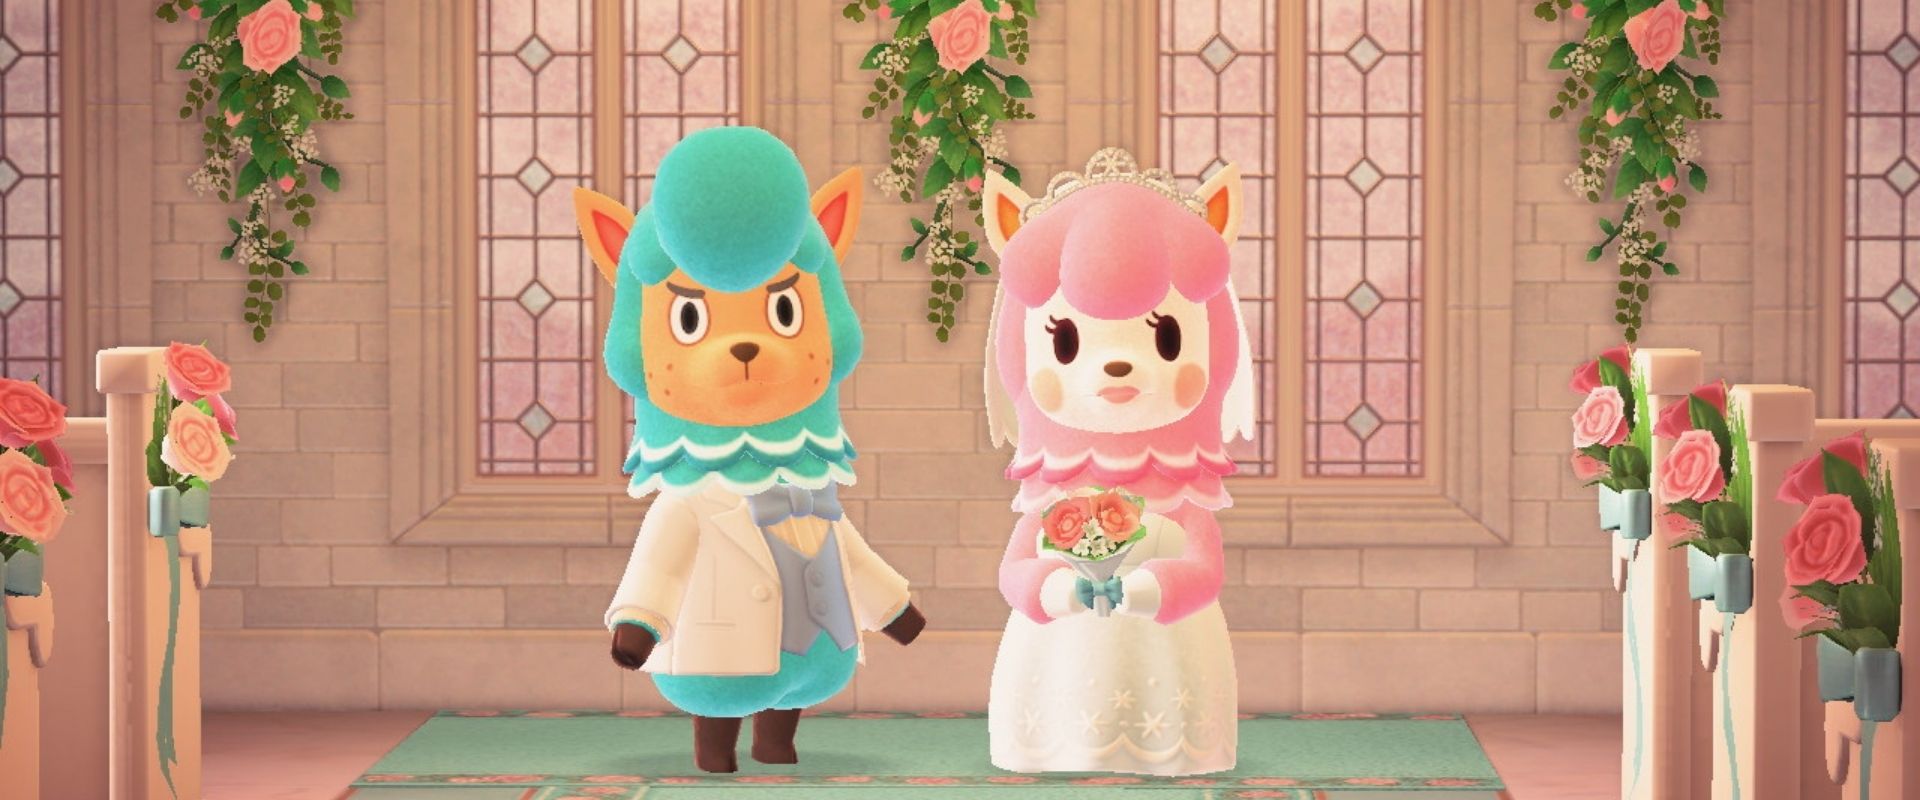 Special Events This June in Animal Crossing New Horizons